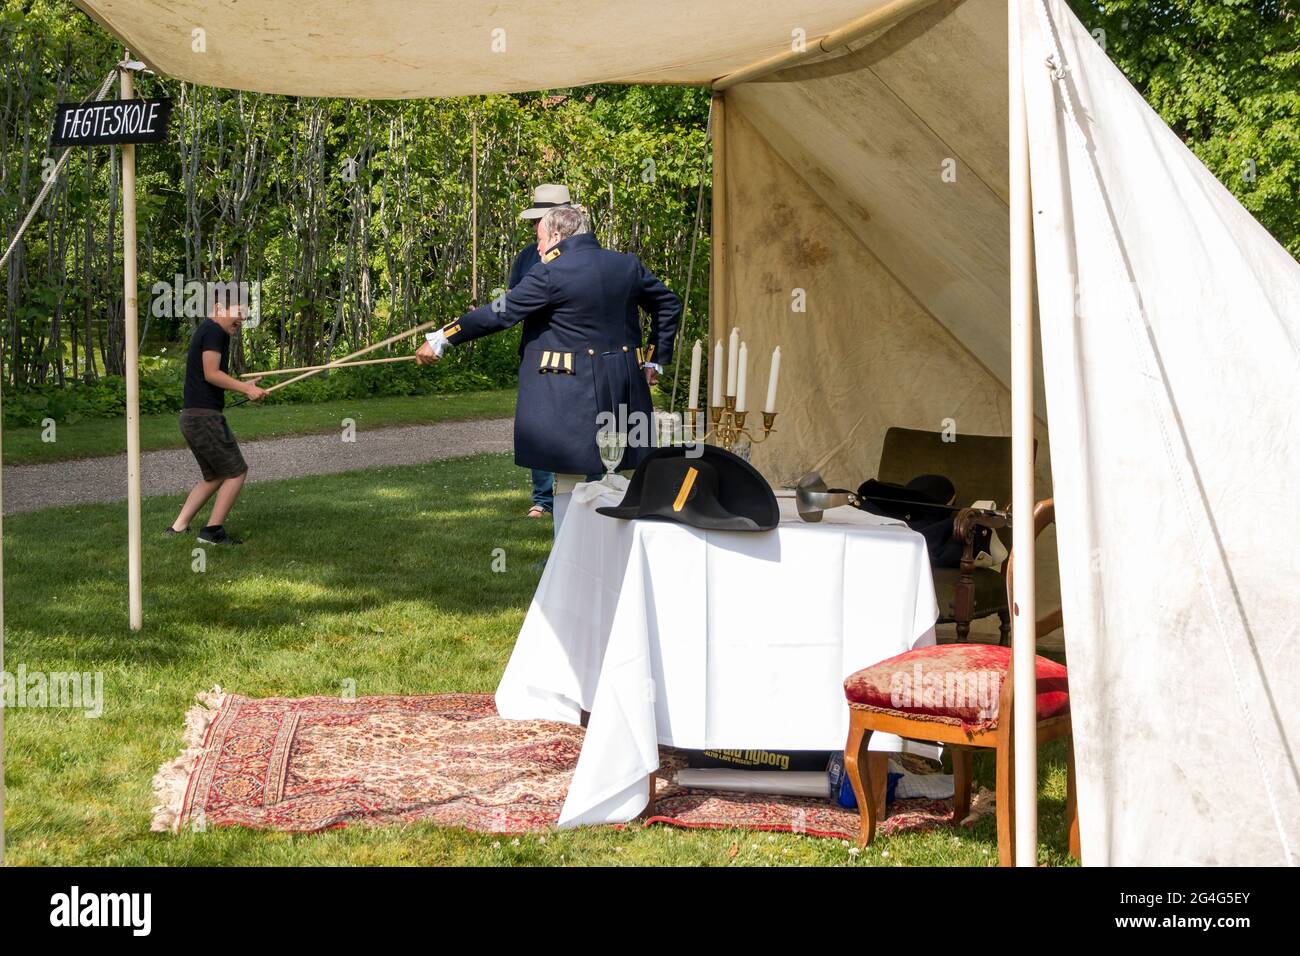 Auning, denmark - 19 June 2021: 1700s day at Gammel Estrup Castle, Fencing school where you can learn to fencing with sabers or swords Stock Photo